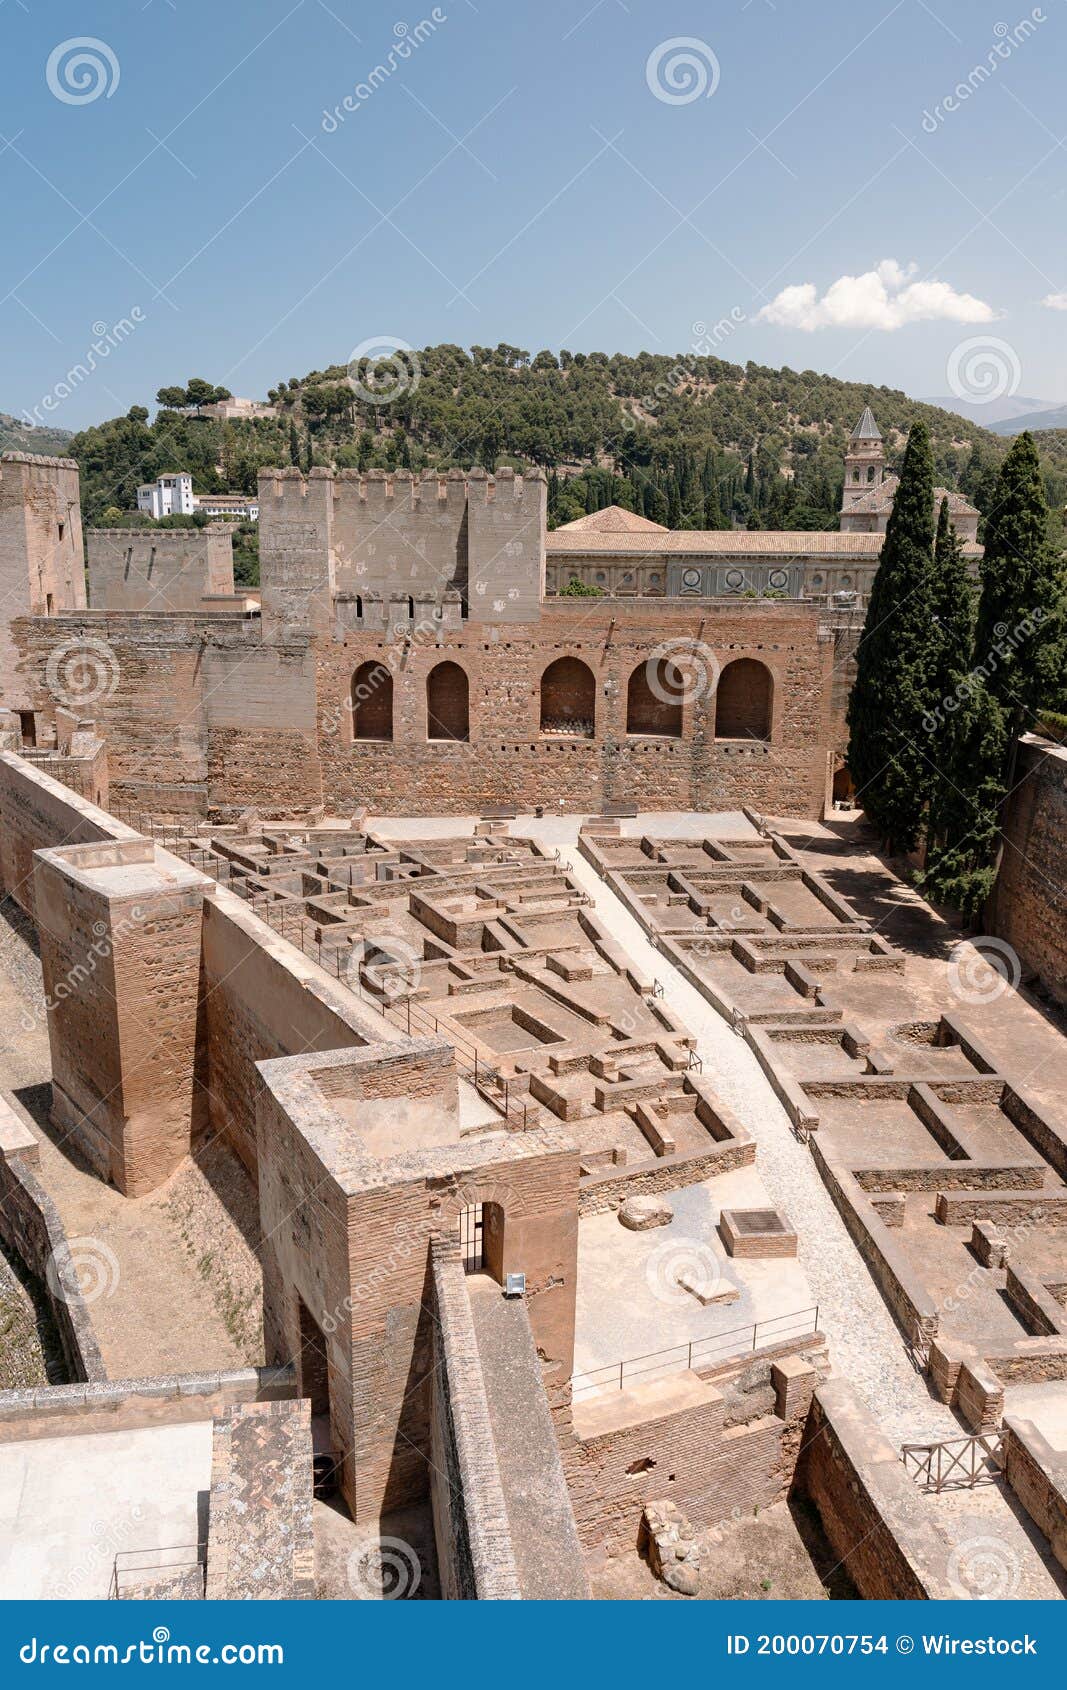 alcazaba of the alhambra in granada on a sunny day without people